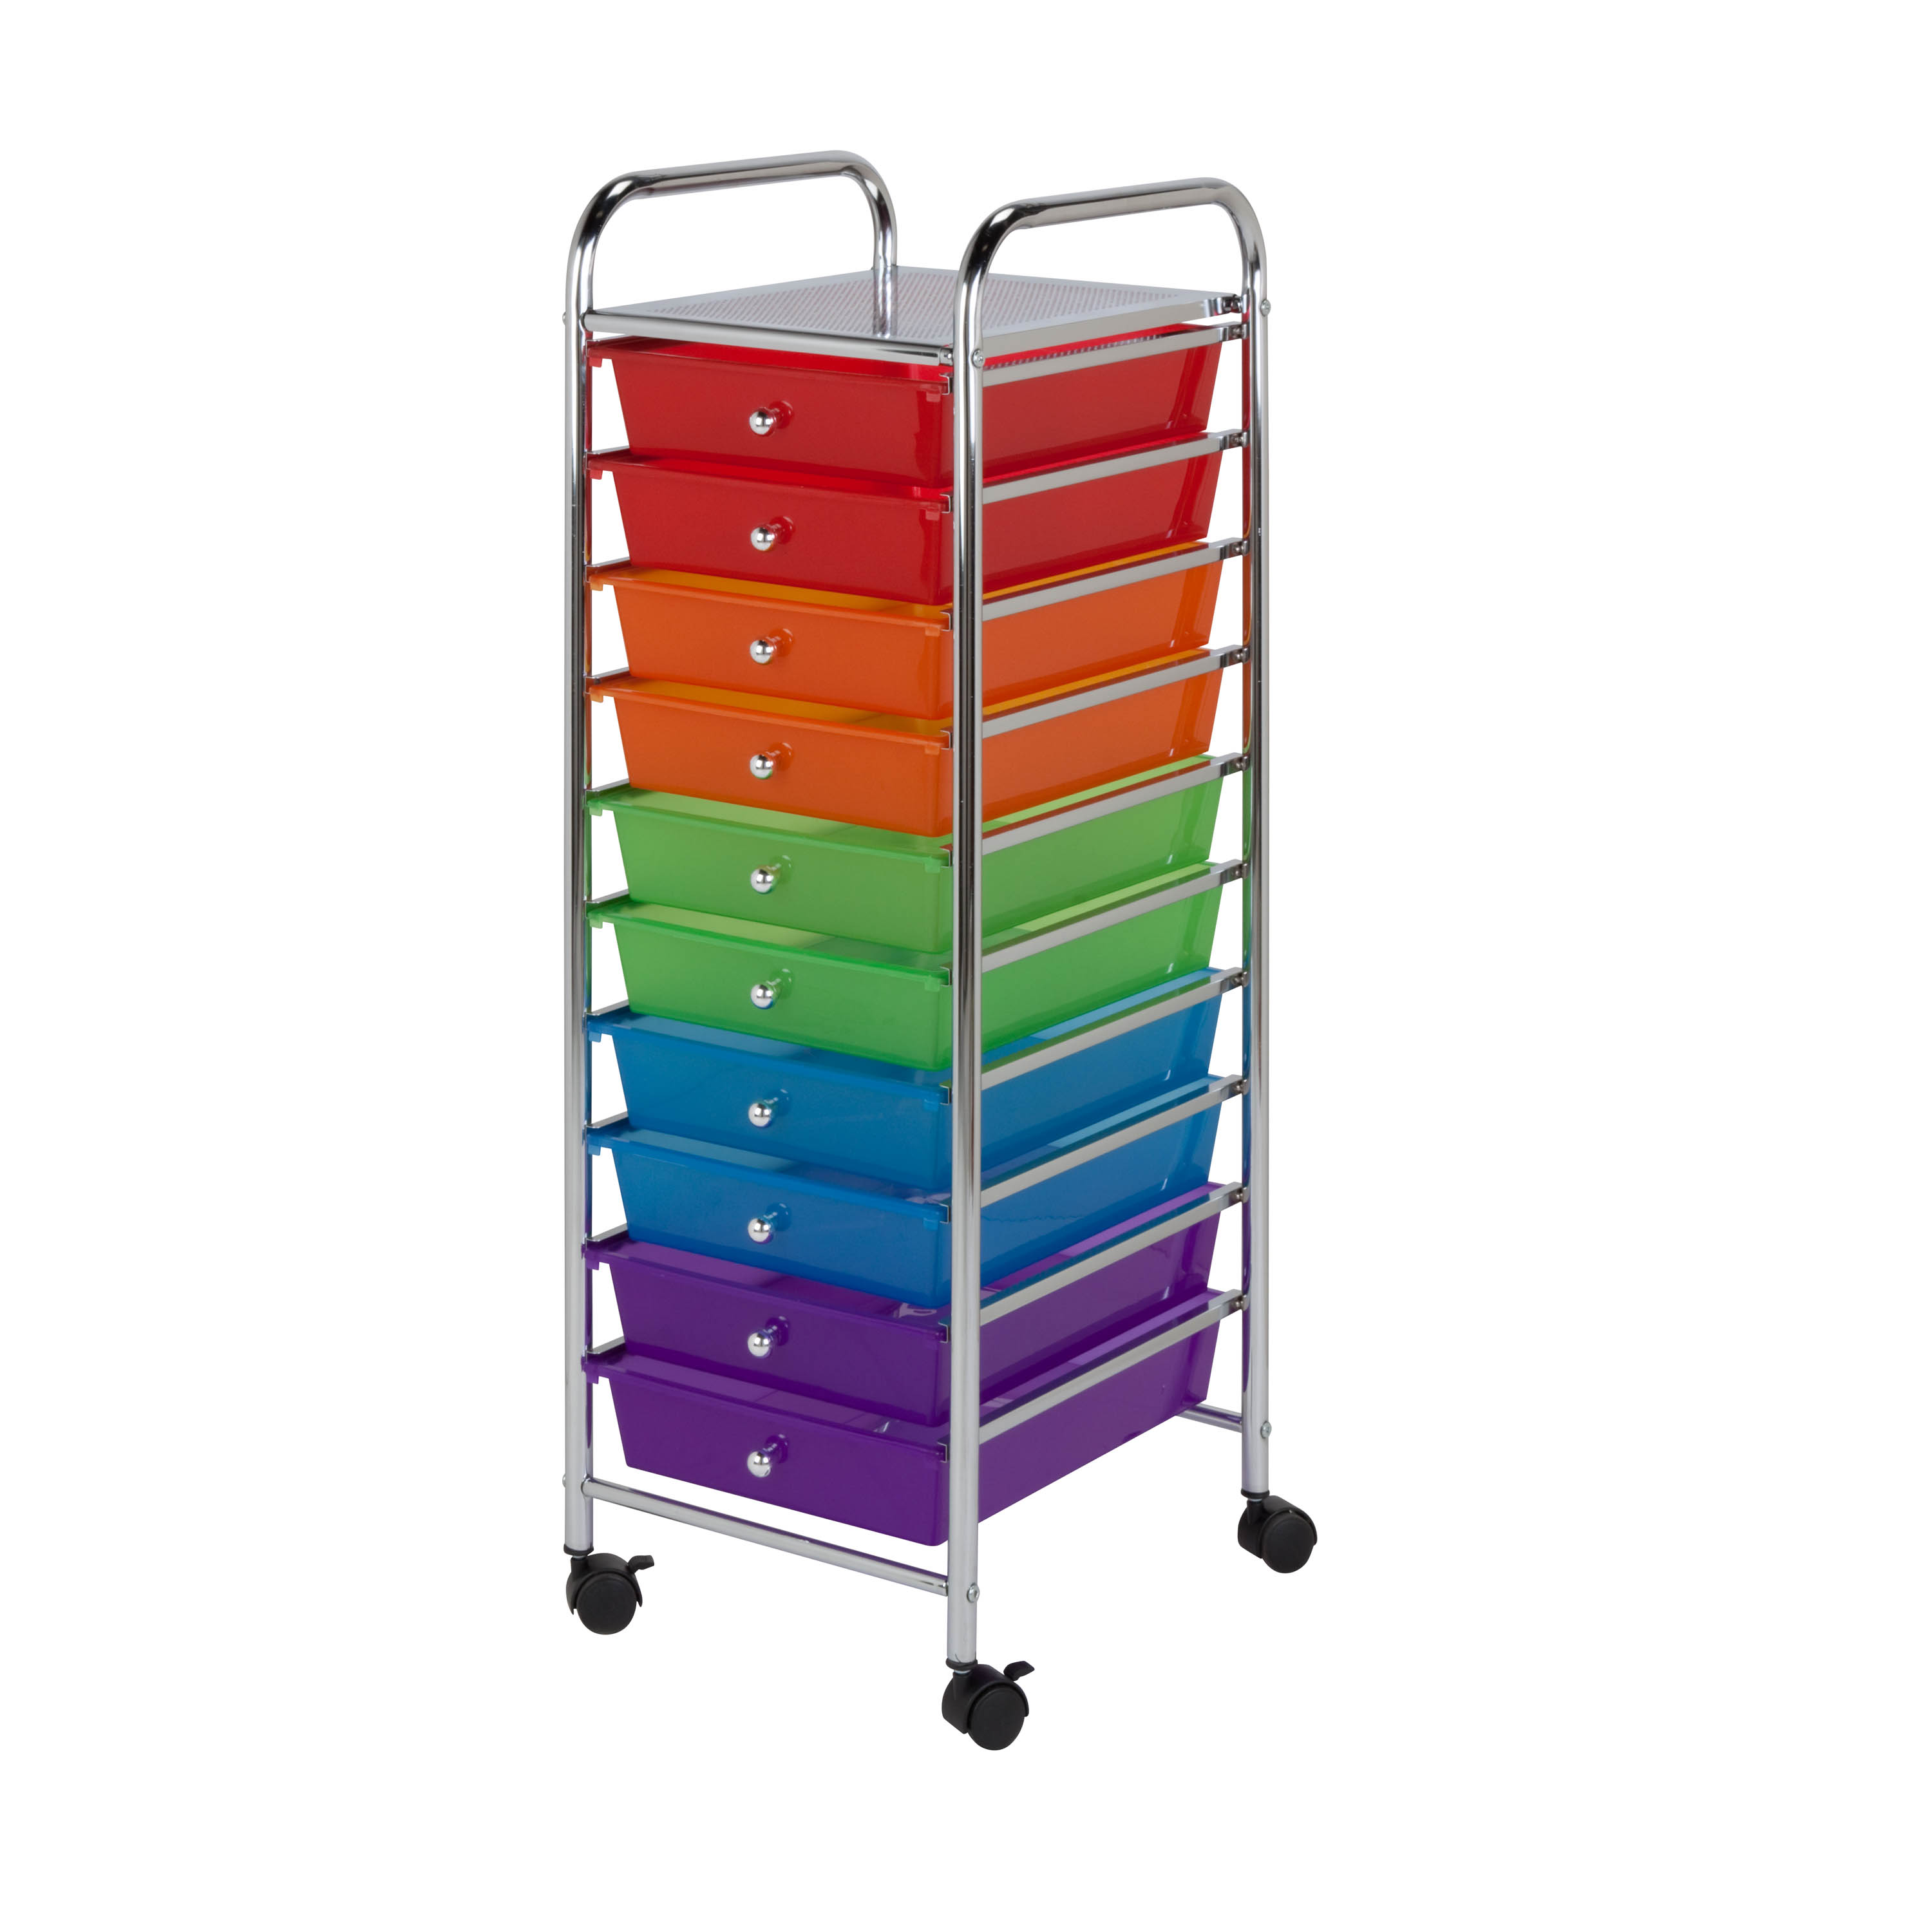 Honey-Can-Do 10-Drawer Multi-Color Rolling Cart, Rainbow - image 1 of 7